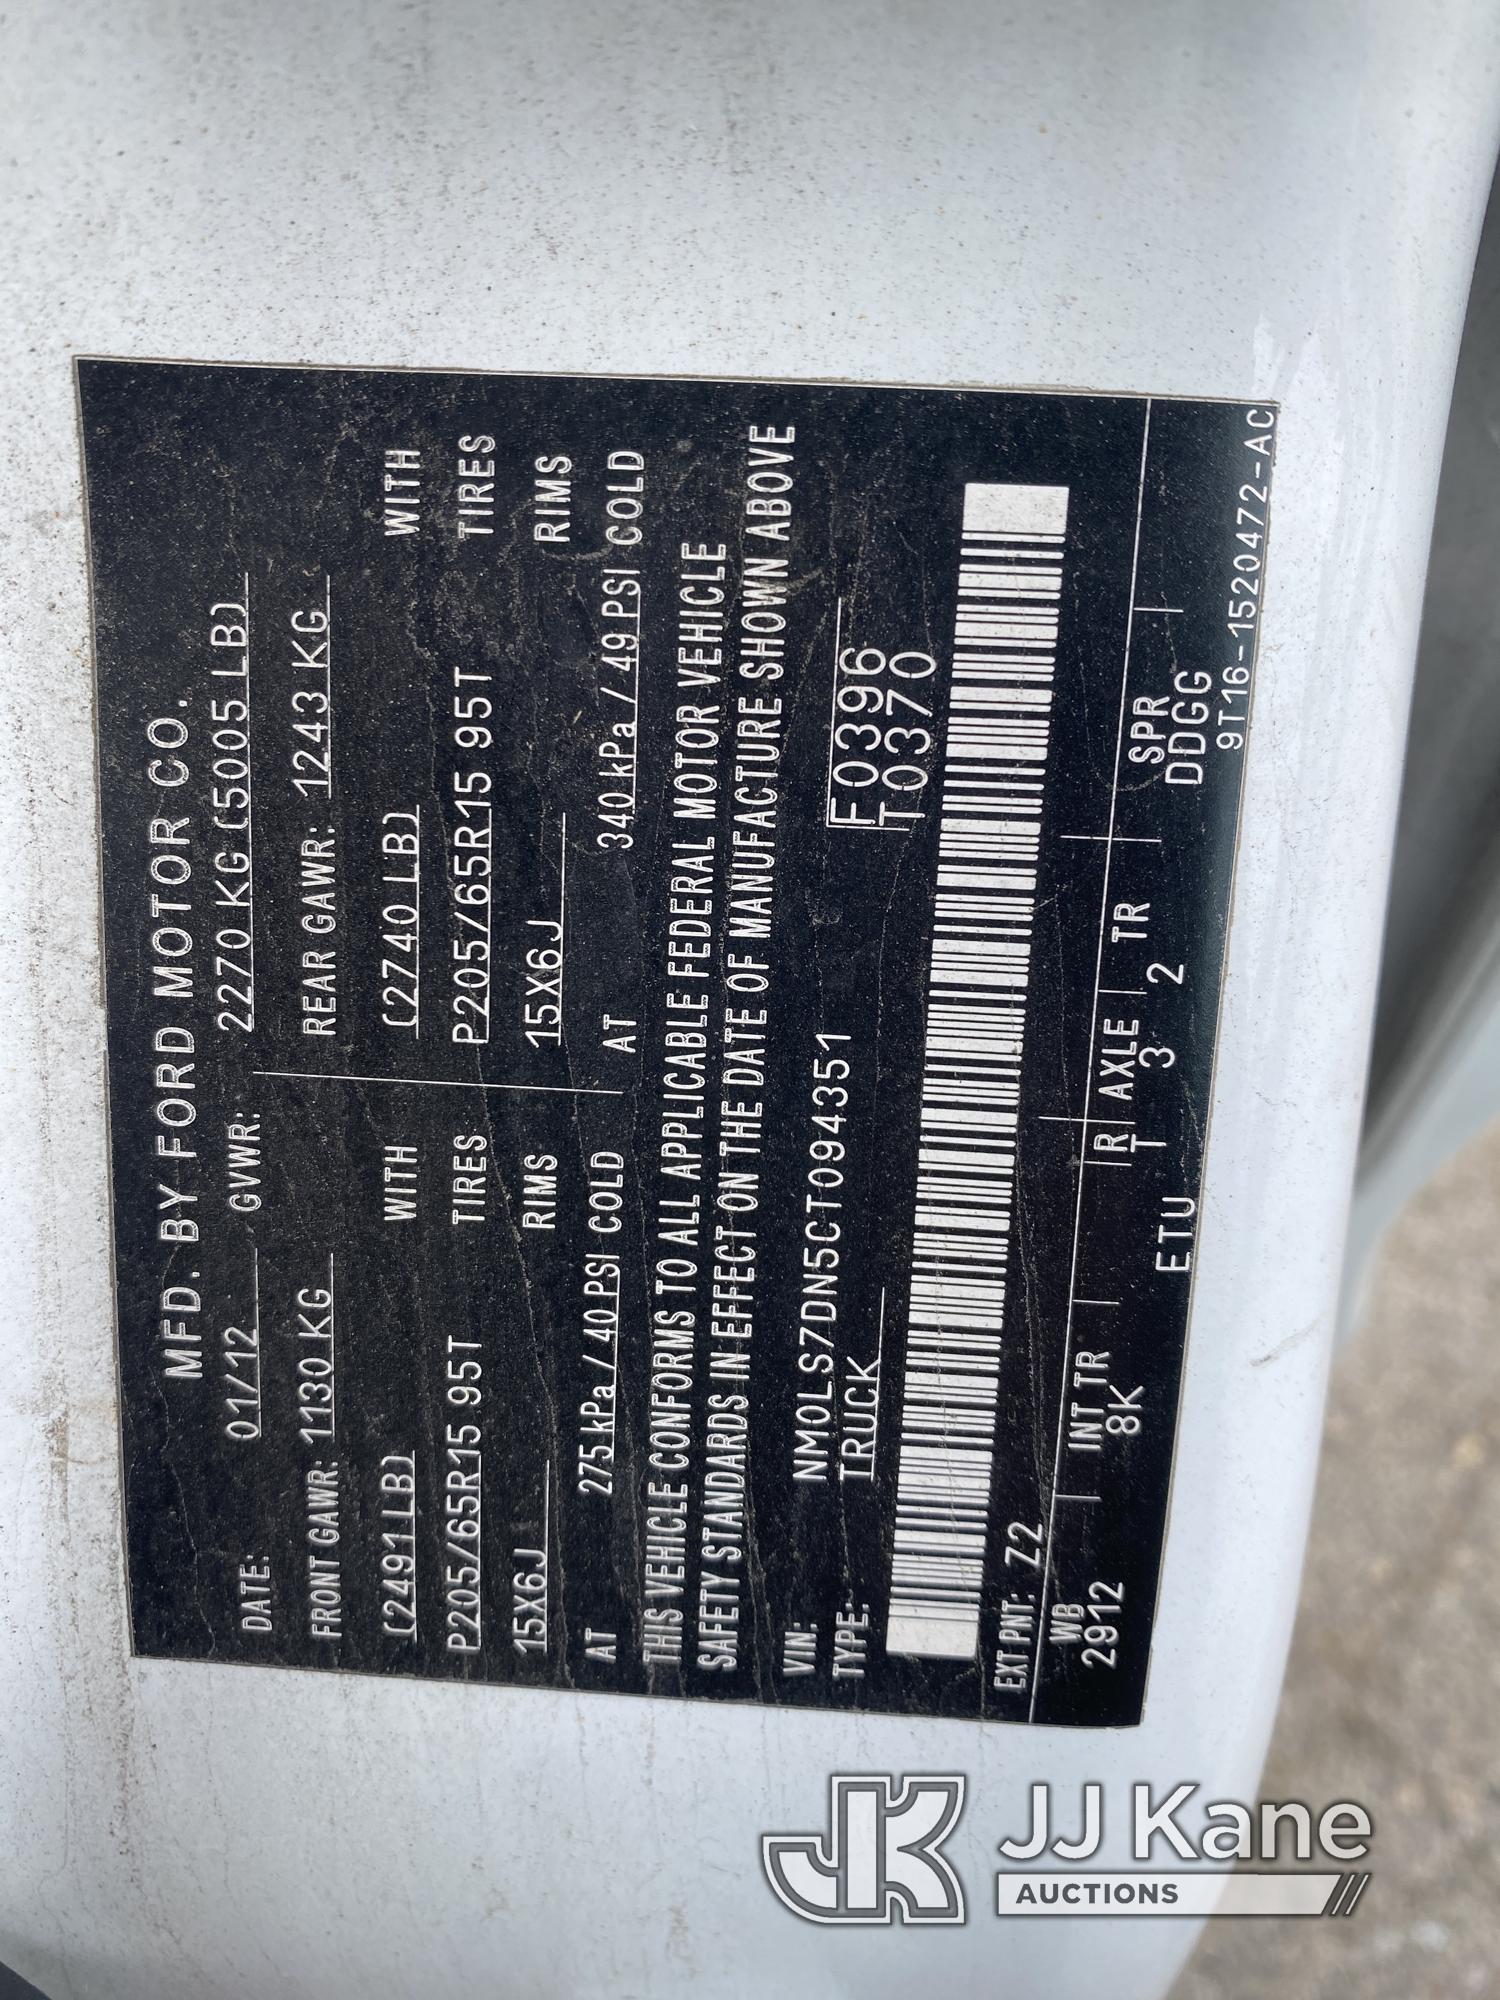 (South Beloit, IL) 2012 Ford Transit Connect Mini Cargo Van Not Running, No Crank, Condition Unknown